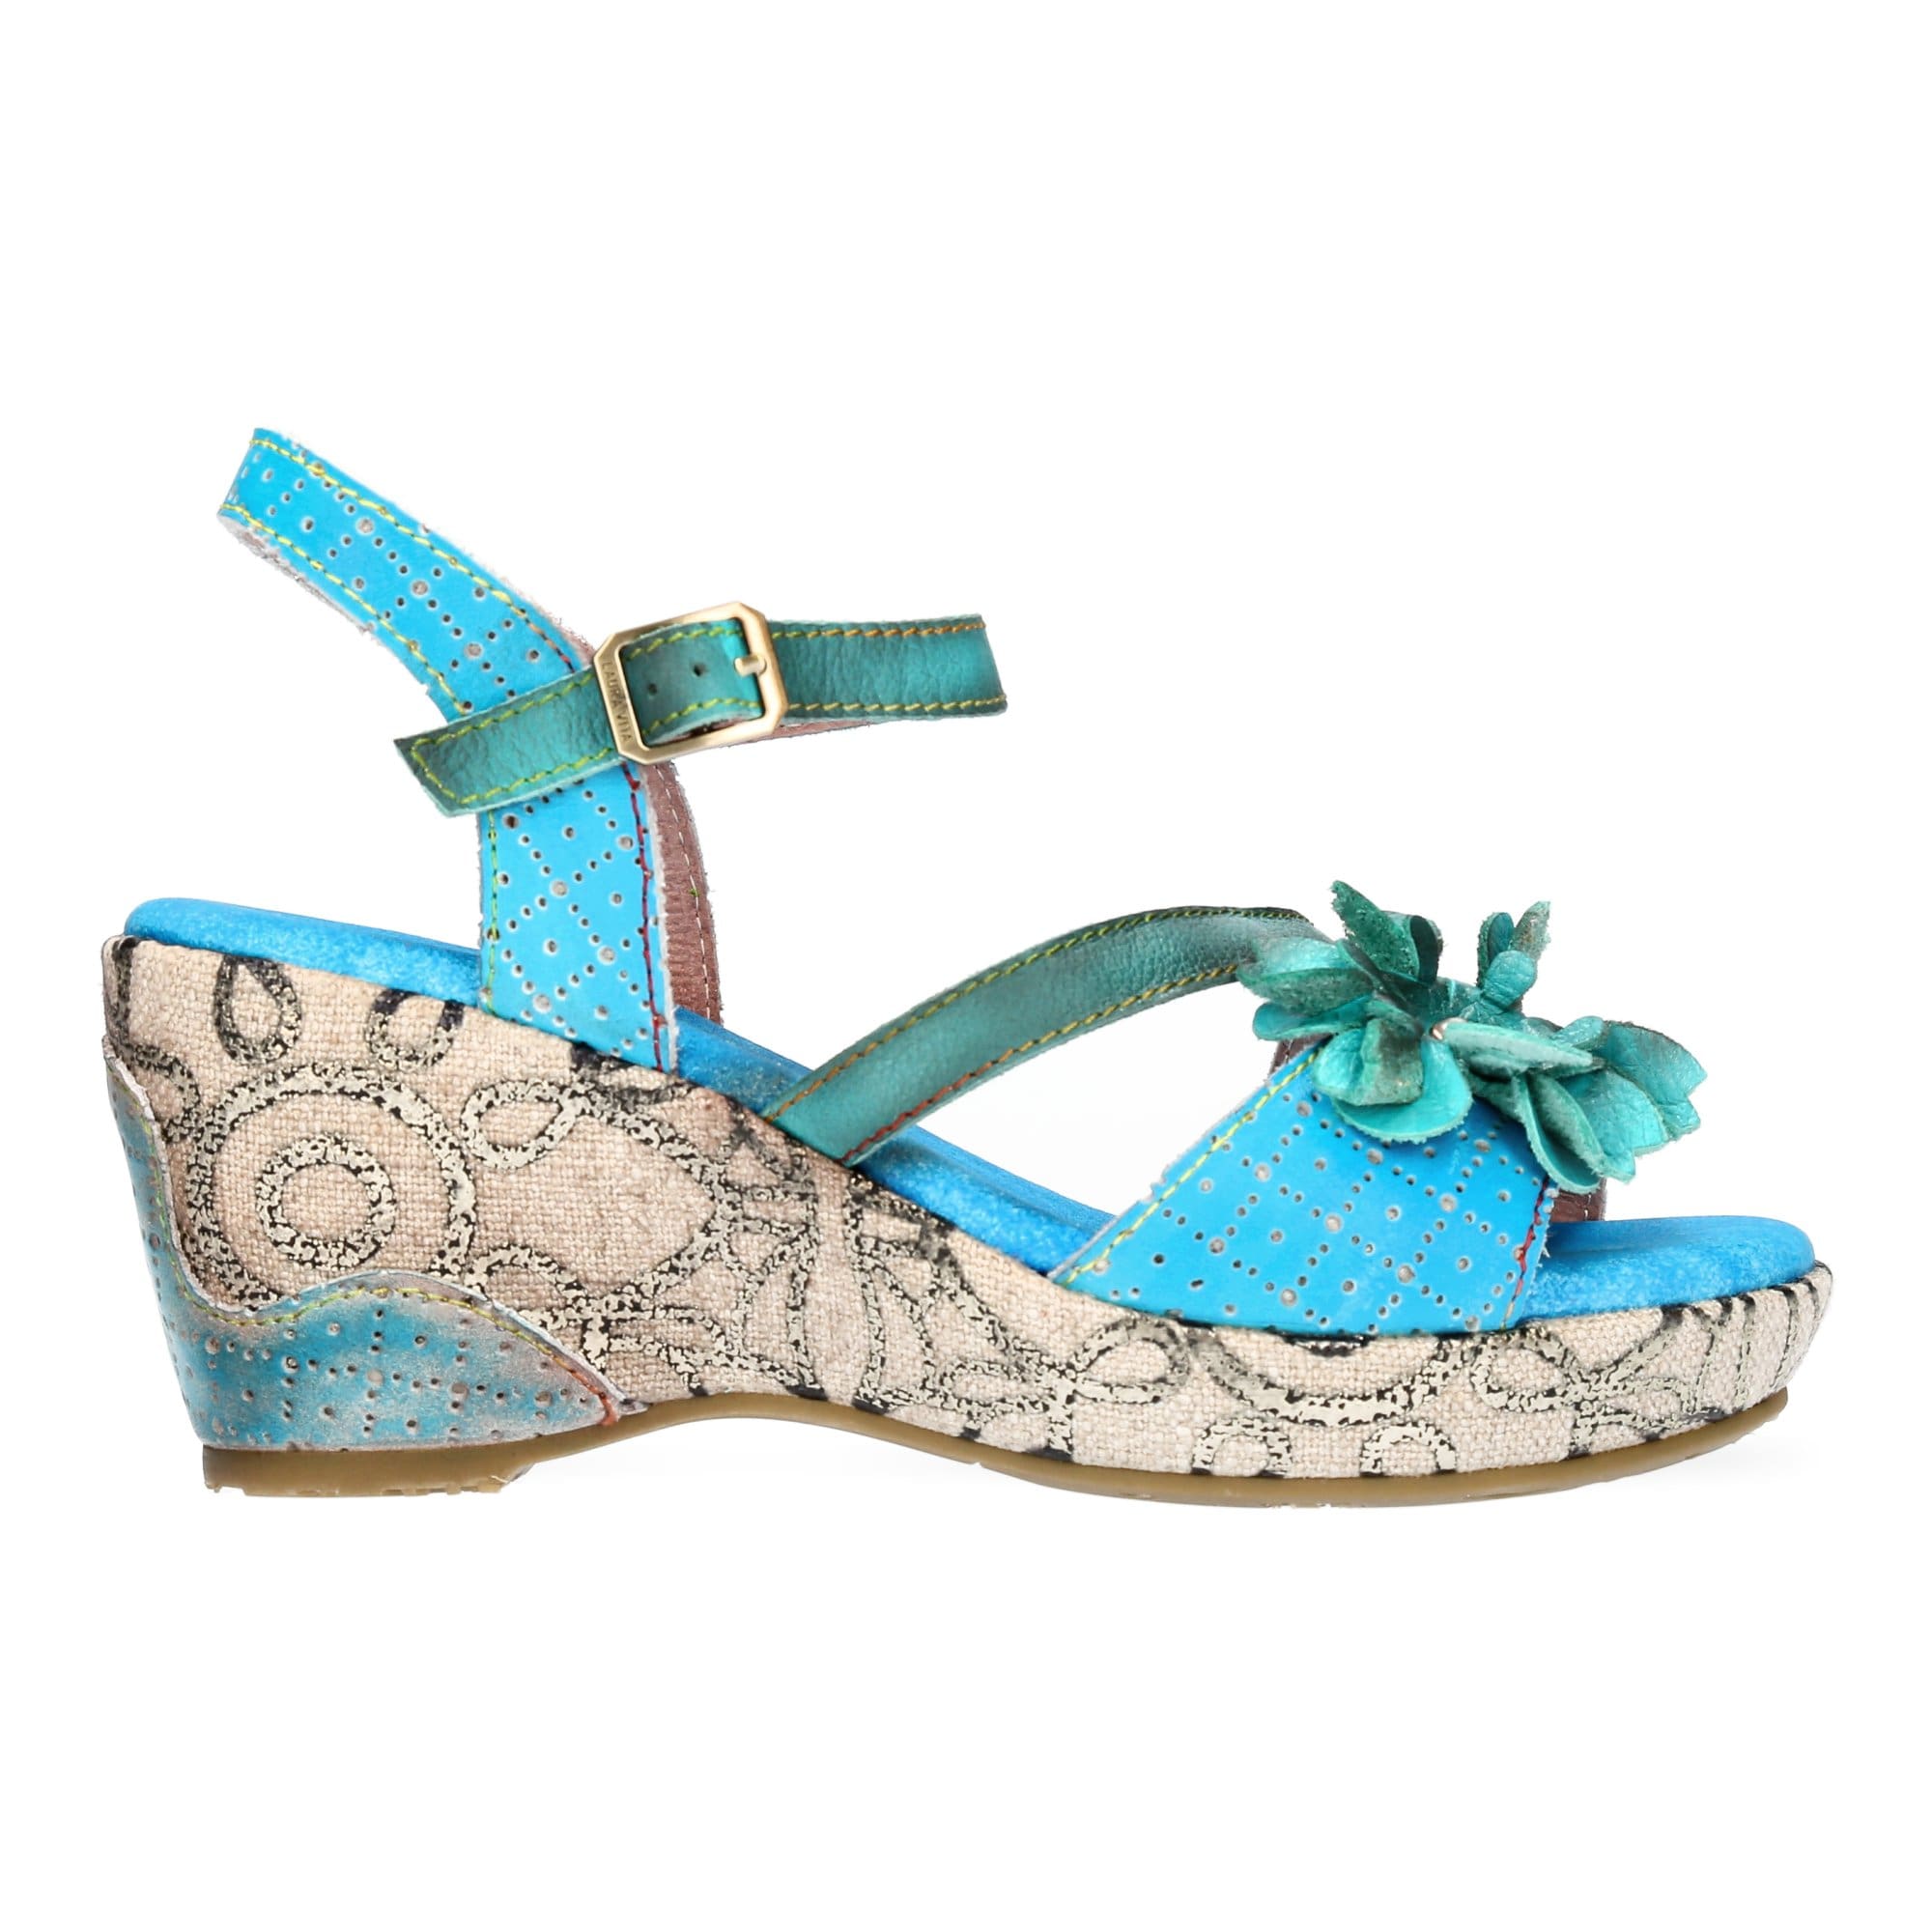 Chaussures BECAUTEO 11 - 35 / Turquoise - Sandale